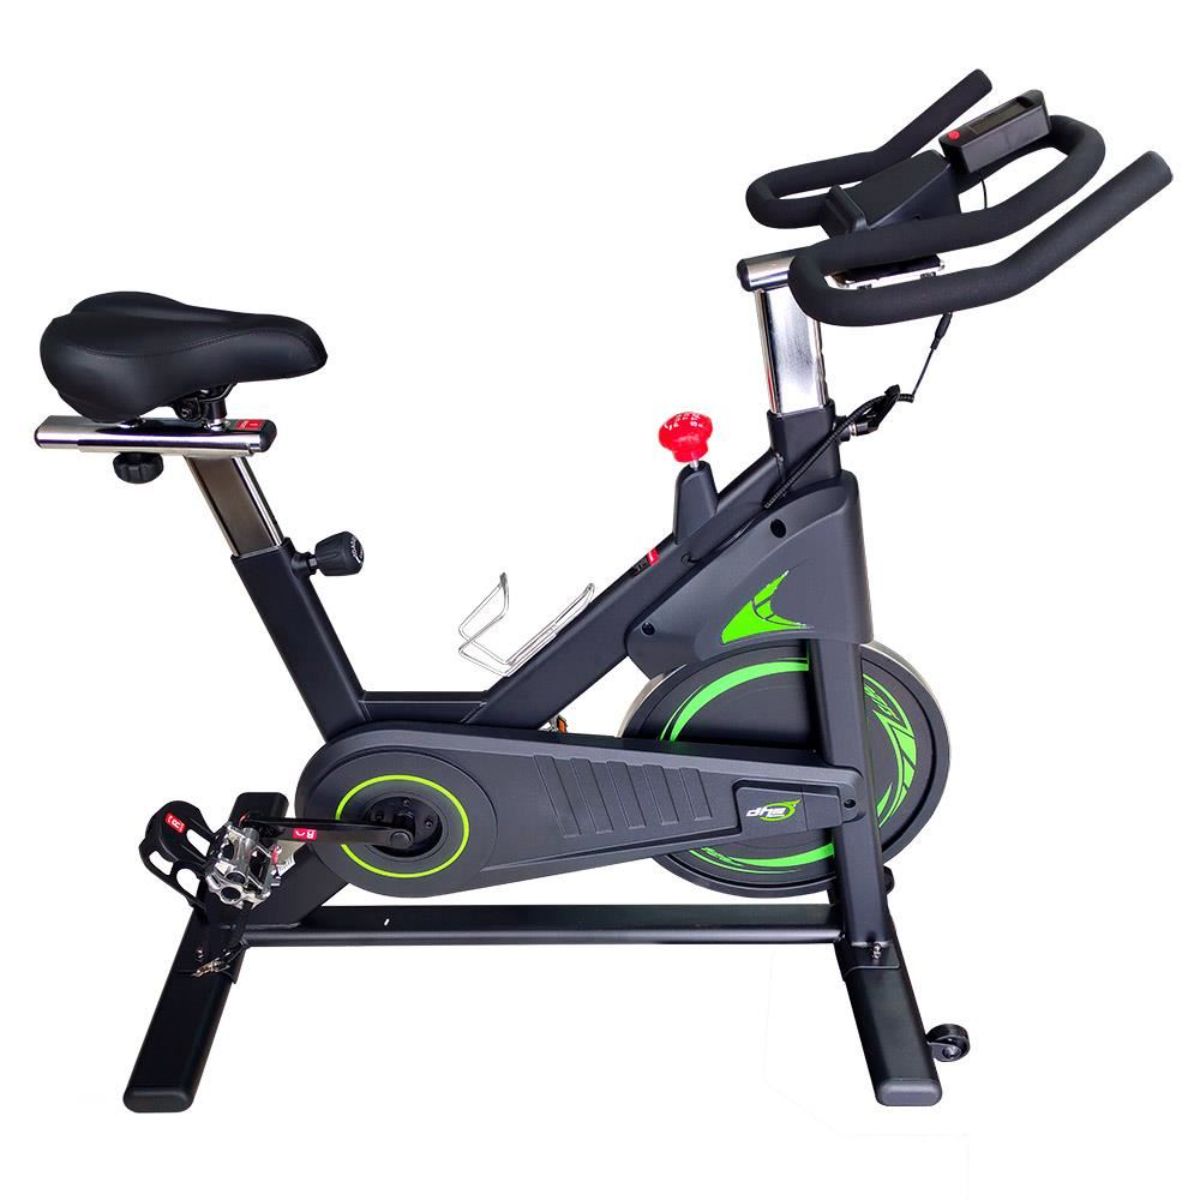 Bicicleta Spinning DHS 2101 DHS imagine noua